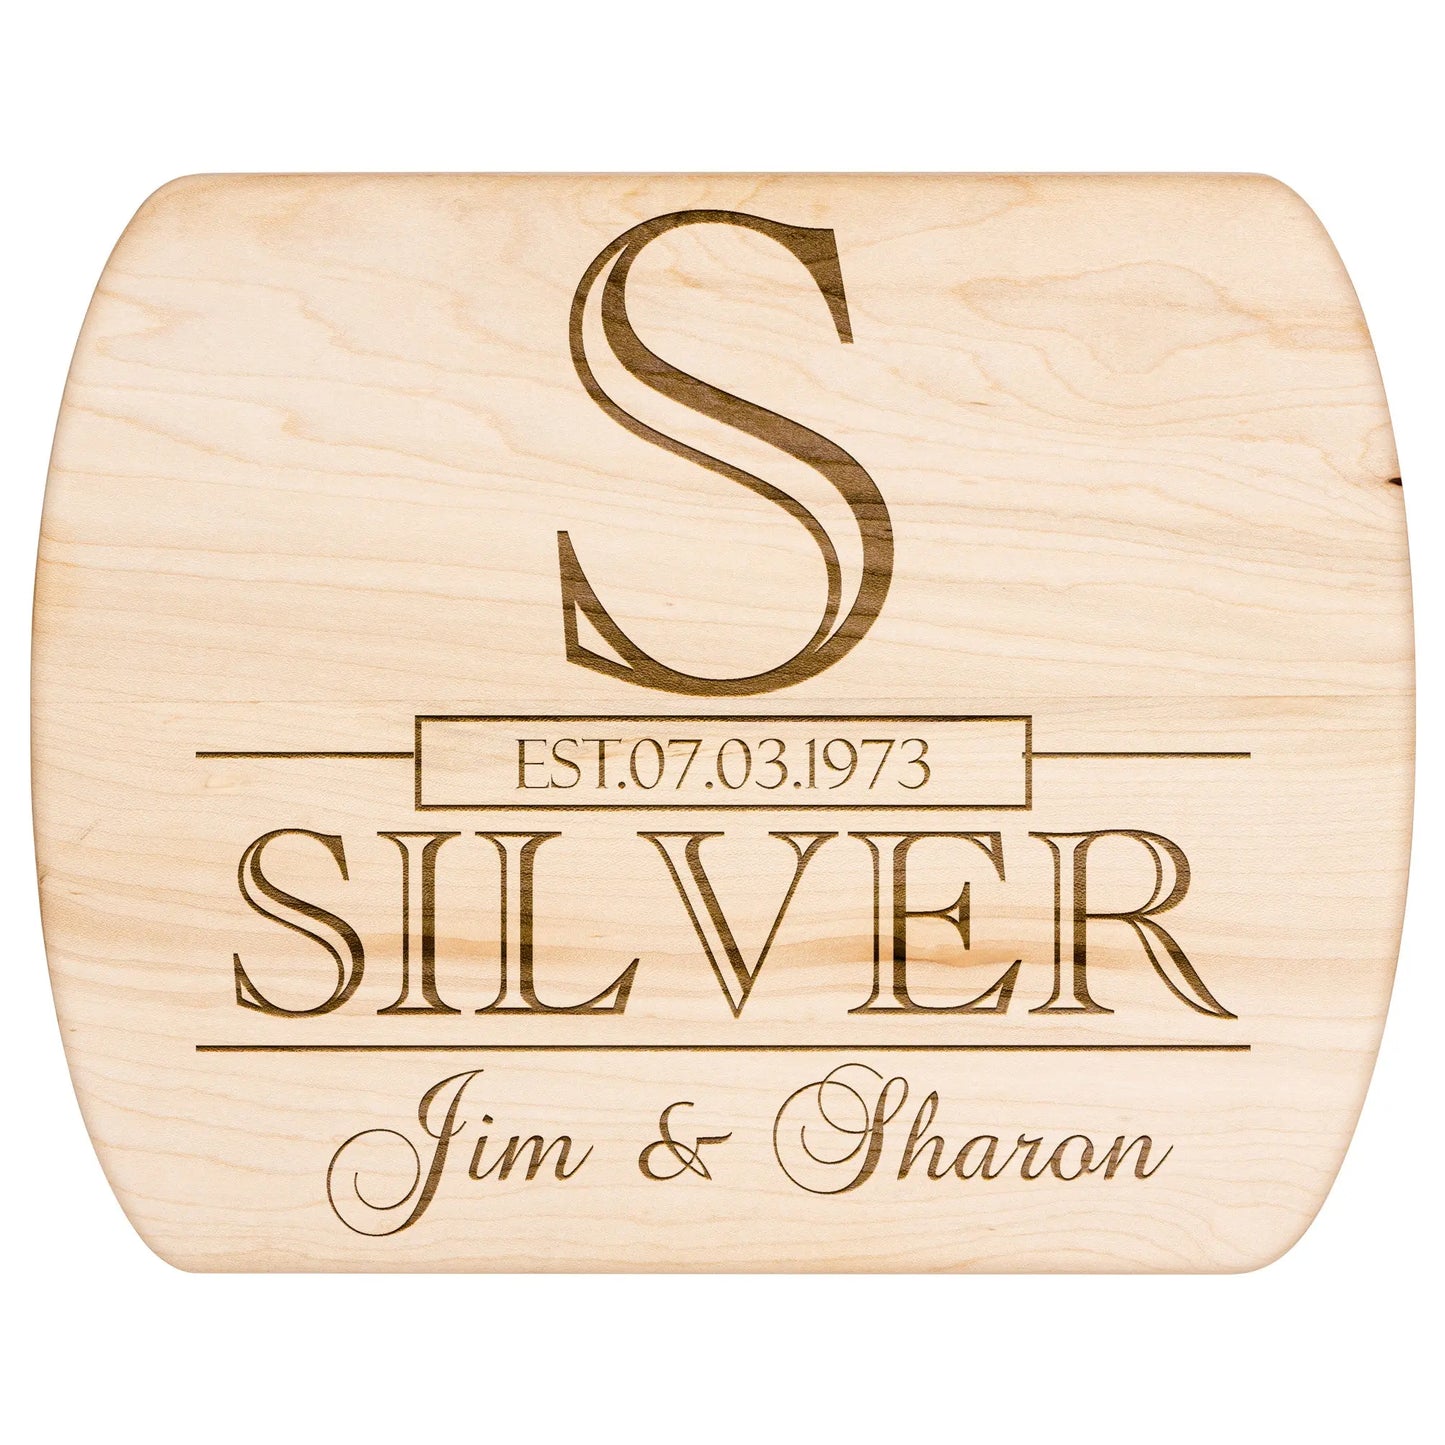 Personalized Engraved Cutting Board with Classic Monogram Design teelaunch